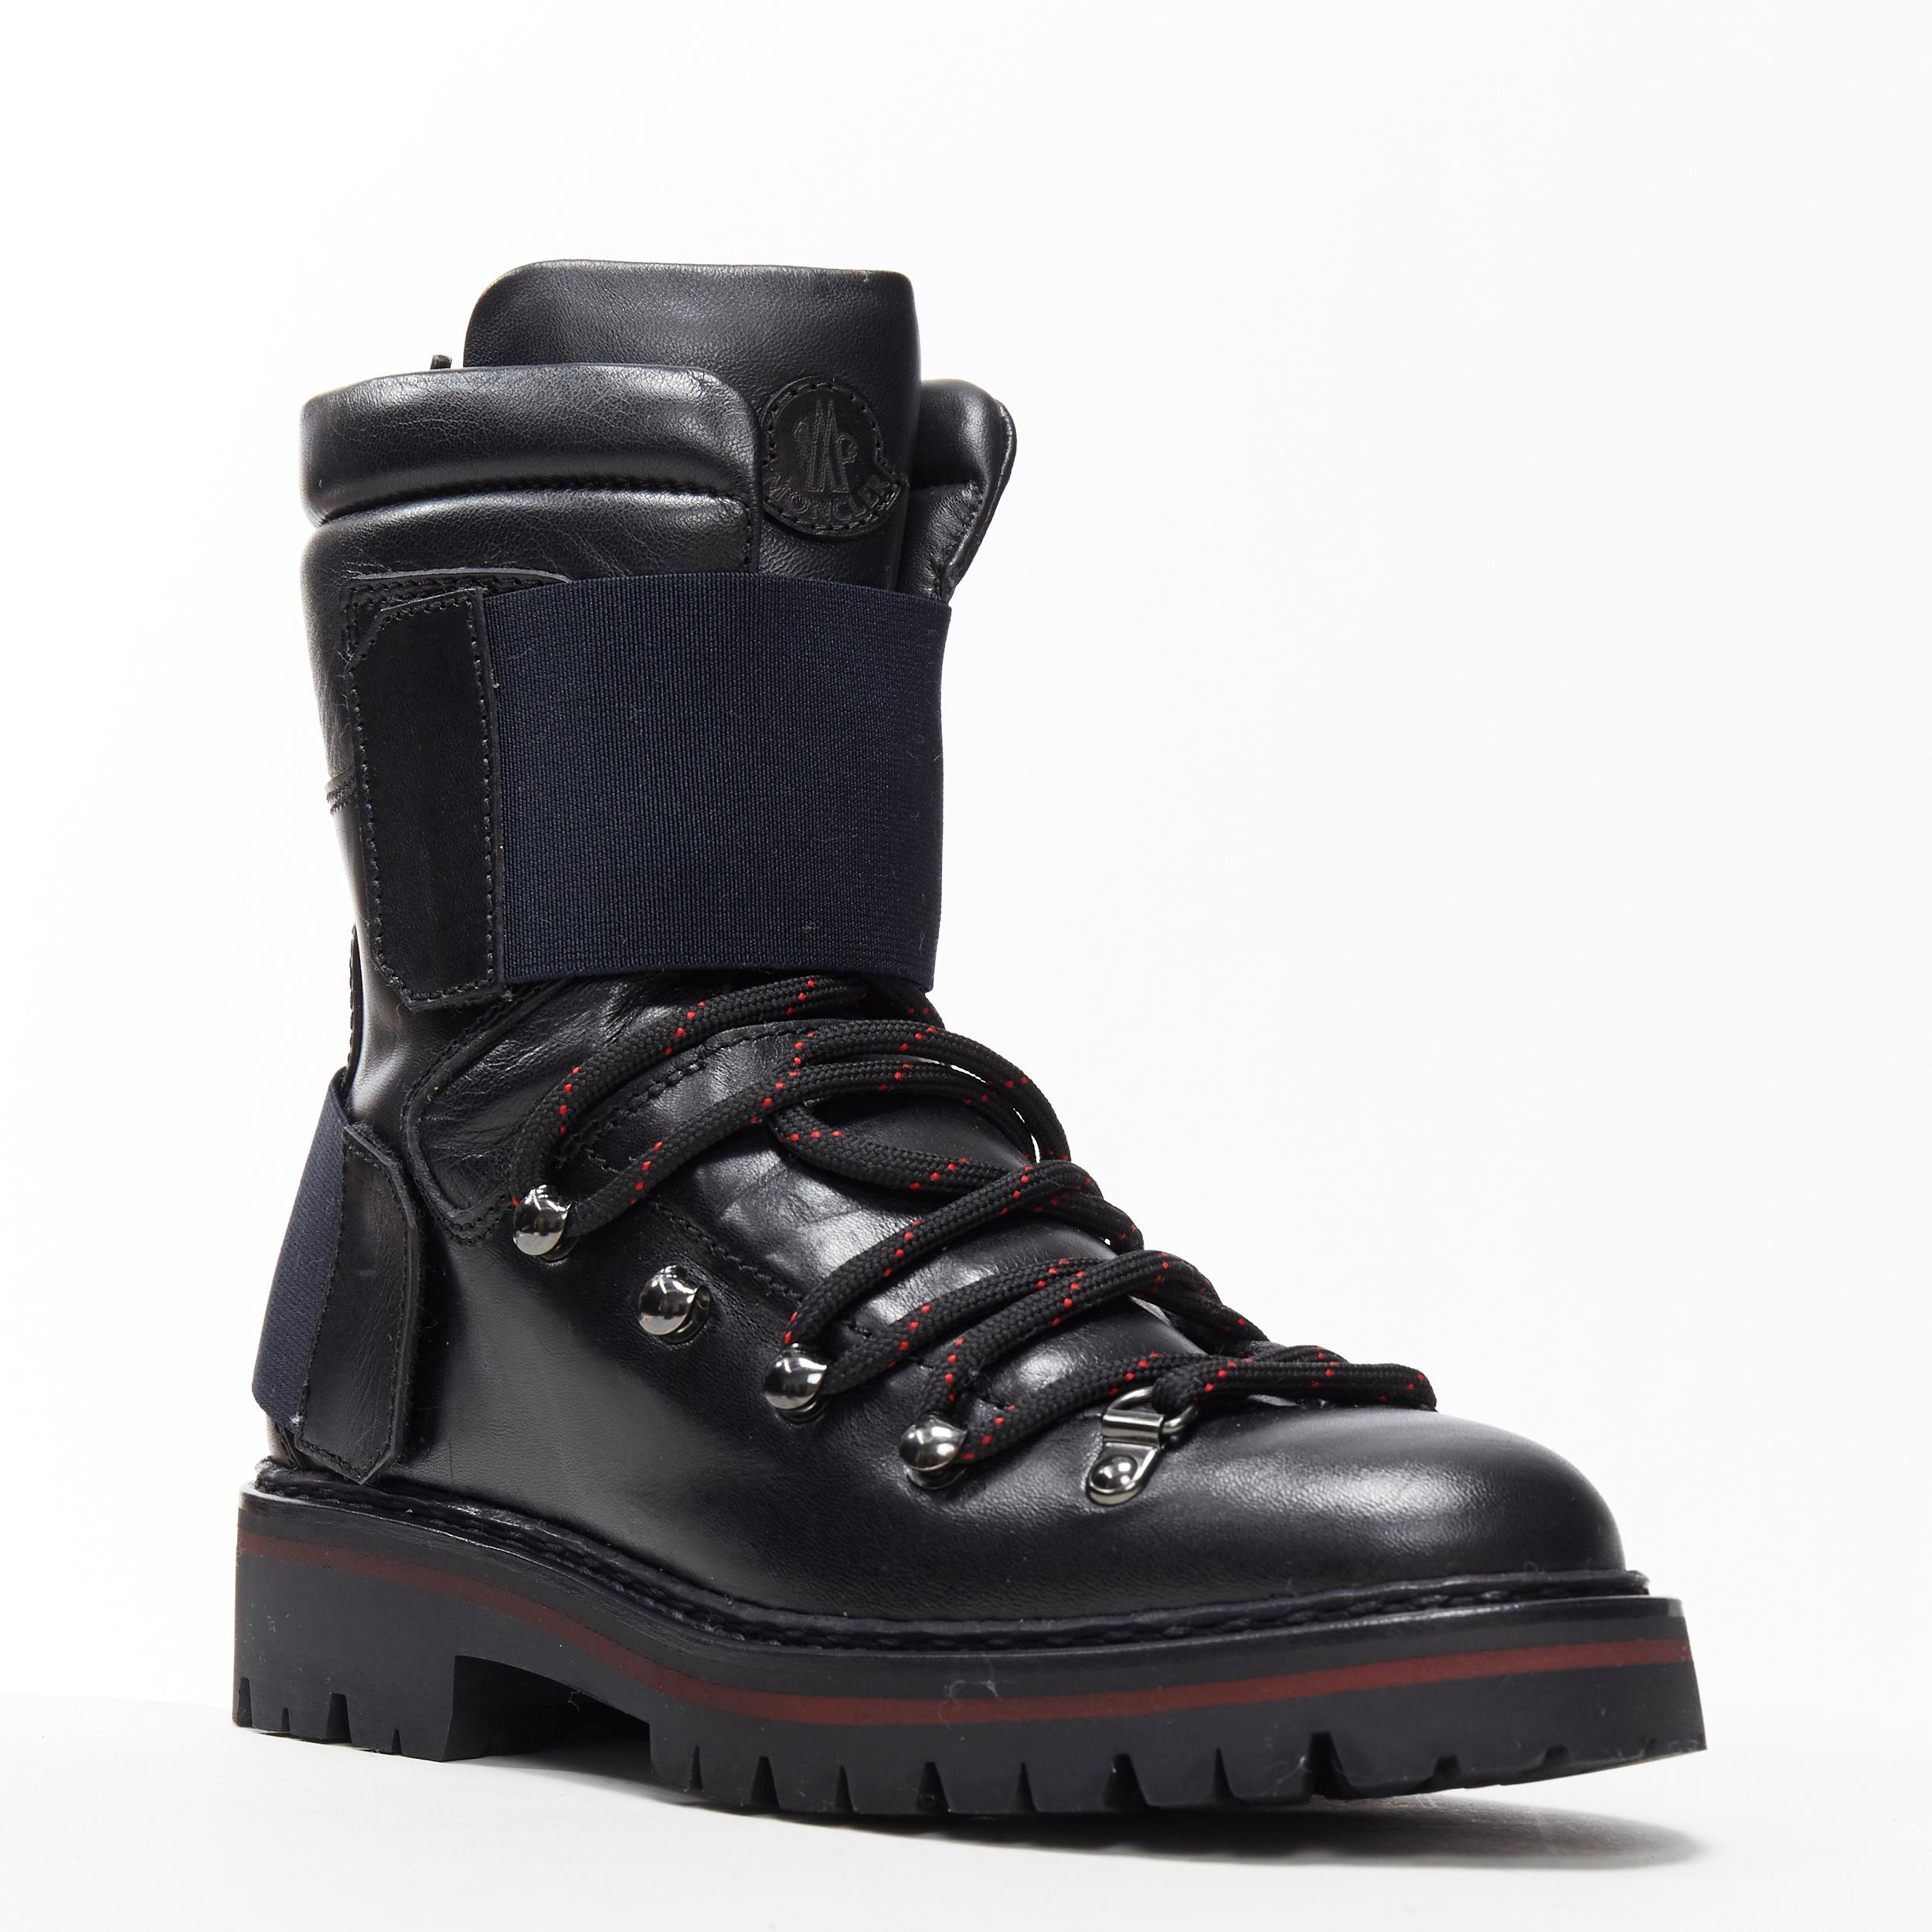 new MONCLER Carol black leather lace up elastic band lug sole hiking boot EU36
Brand: Moncler
Model Name / Style: Hiking boots
Material: Leather
Color: Black
Pattern: Solid
Closure: Lace up
Extra Detail: Elastic stretch band details. Padded upper.